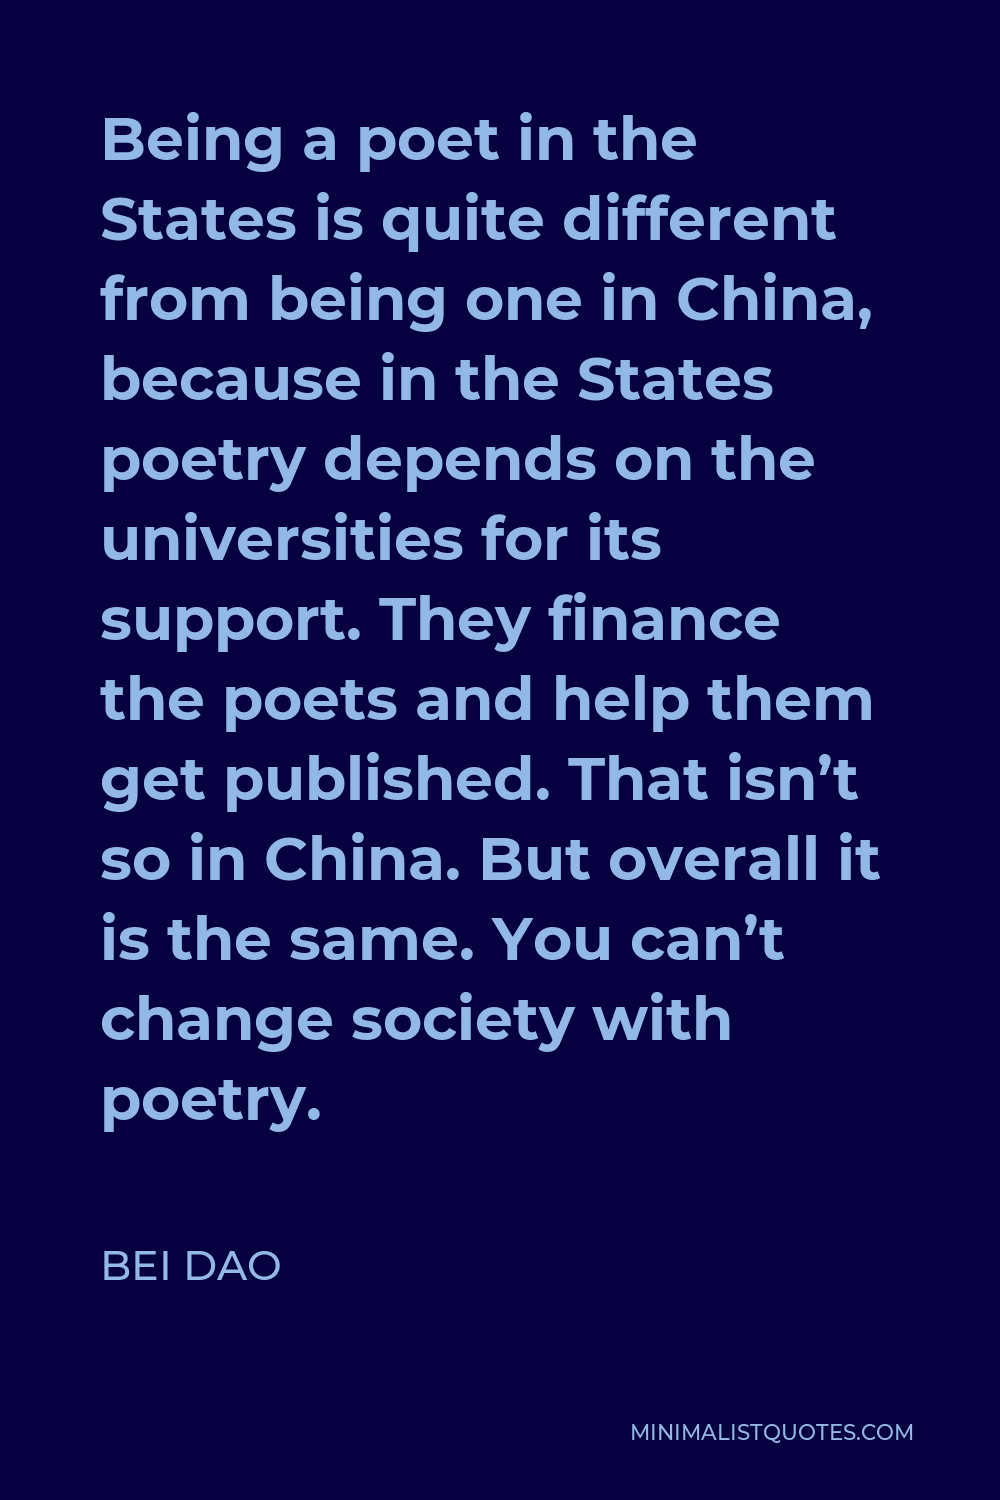 Bei Dao Quote - Being a poet in the States is quite different from being one in China, because in the States poetry depends on the universities for its support. They finance the poets and help them get published. That isn’t so in China. But overall it is the same. You can’t change society with poetry.